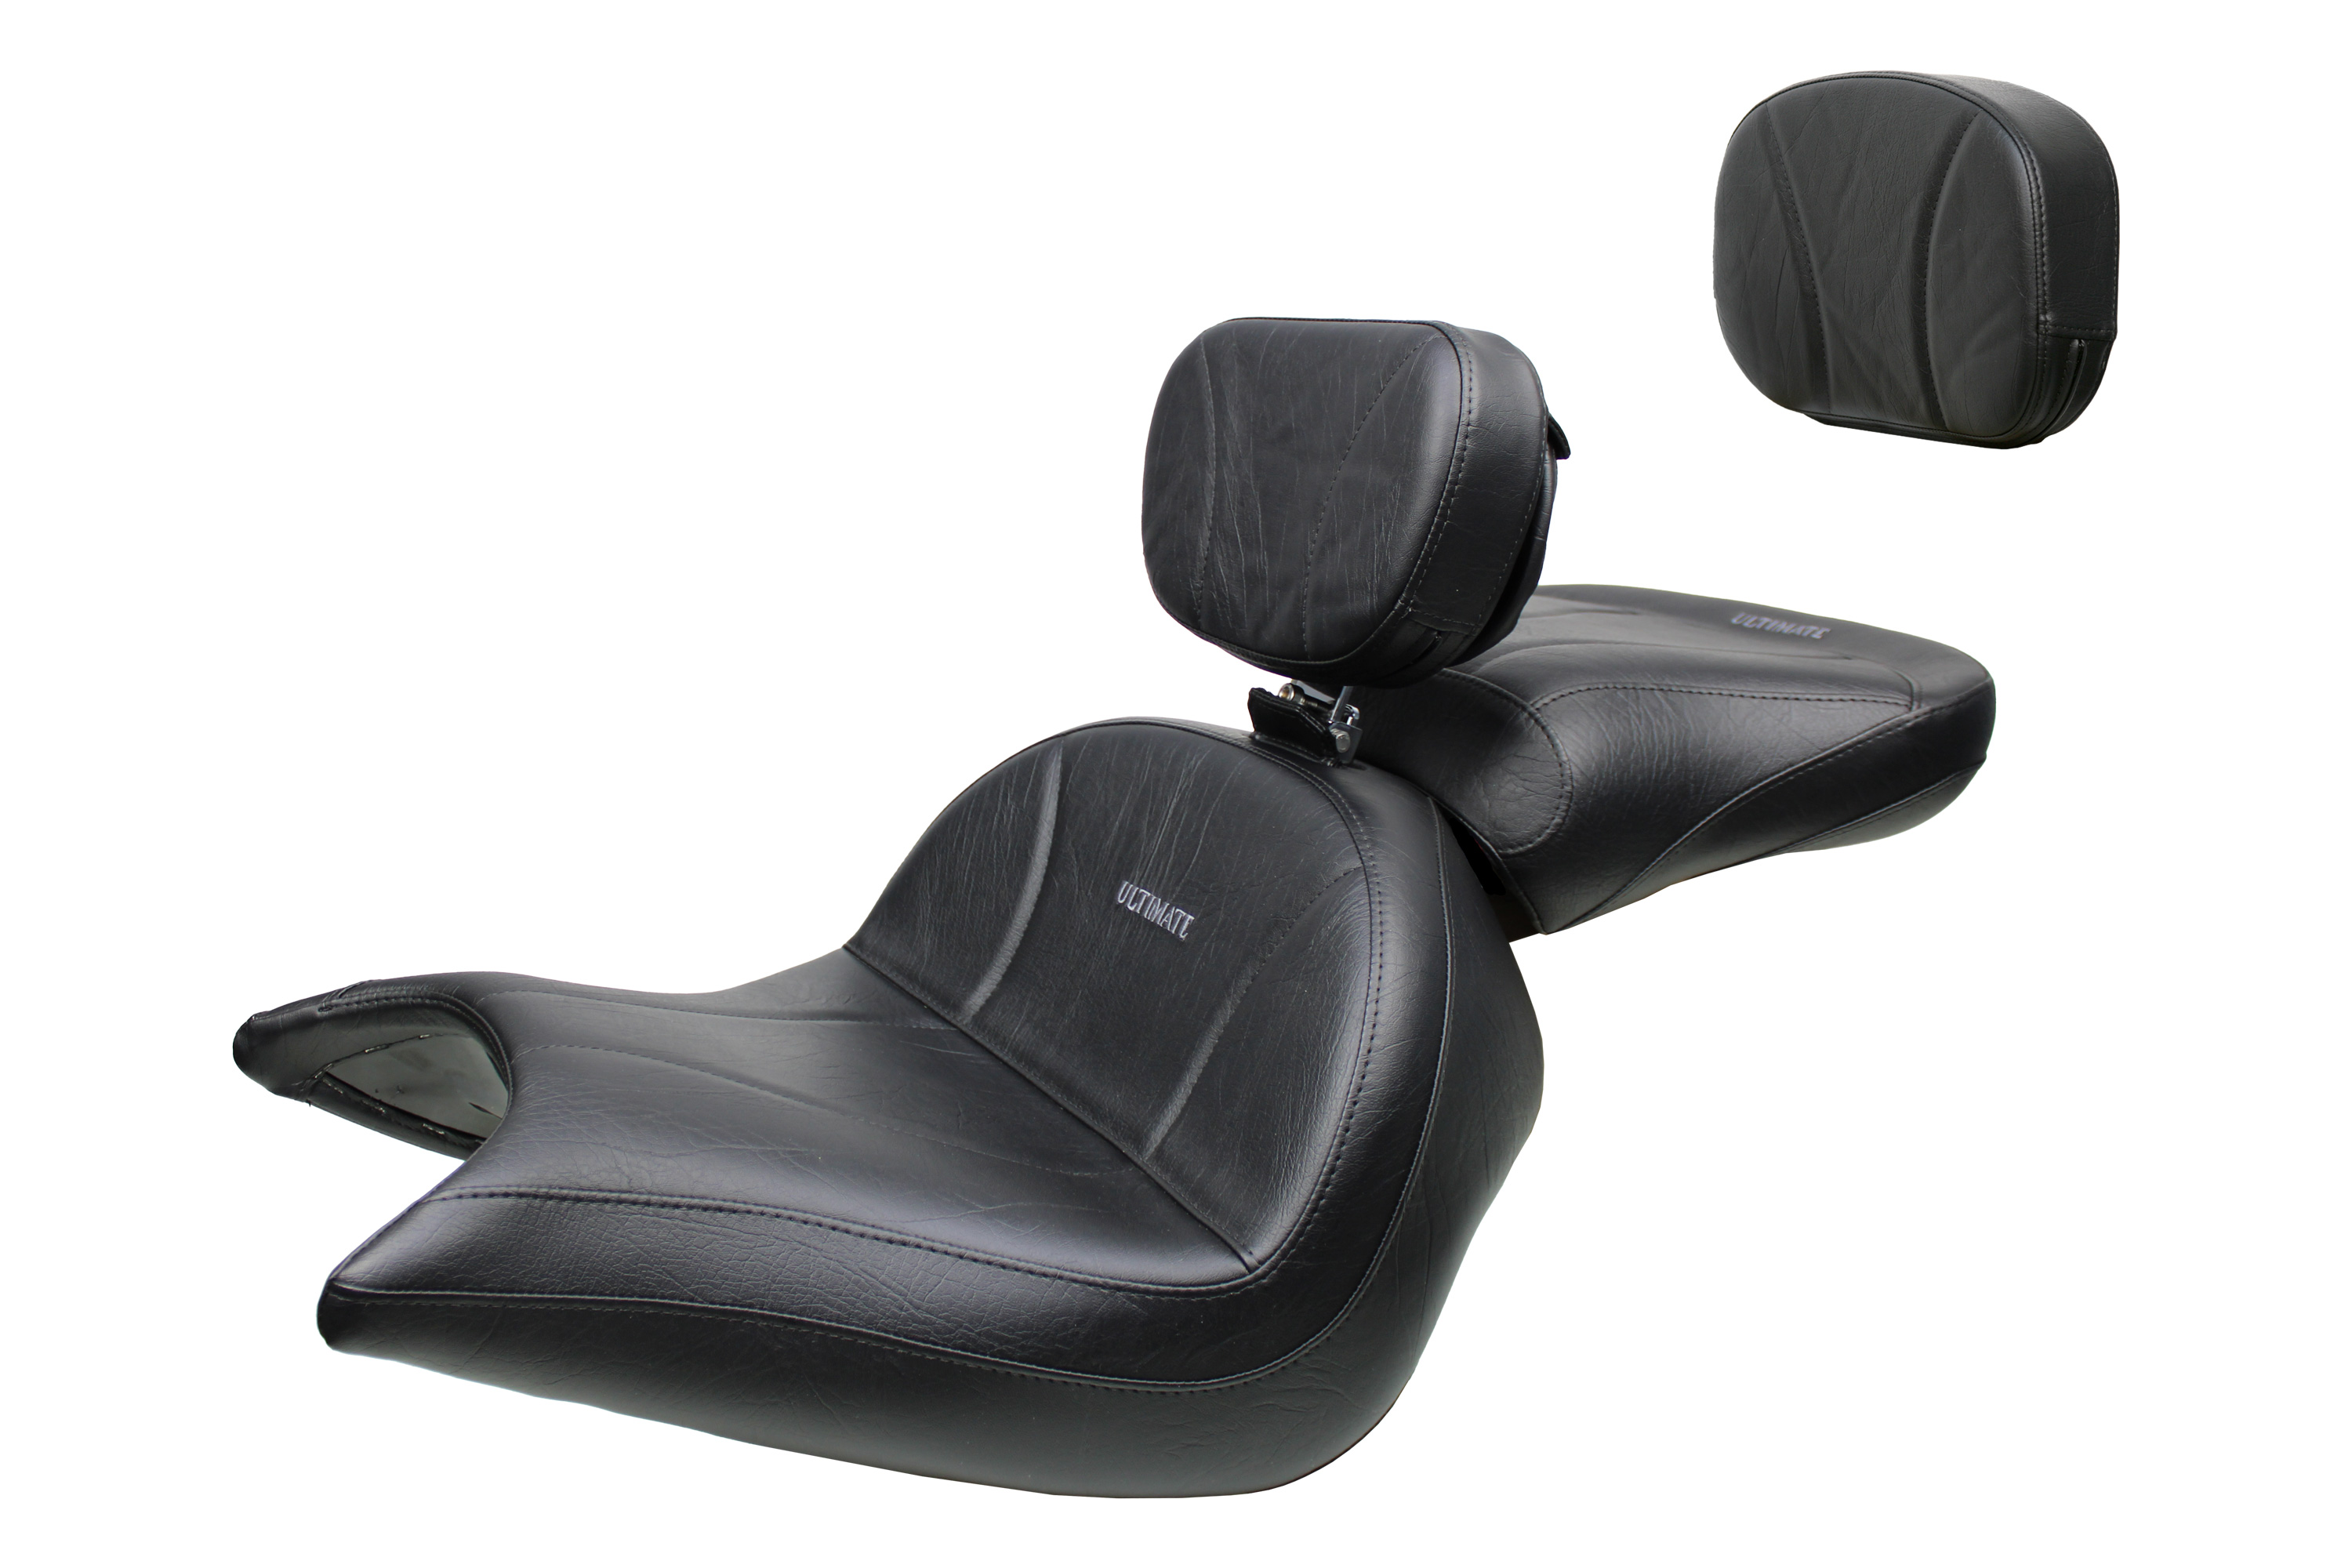 VTX 1800 N Neo Lowrider Seat, Passenger Seat, Driver Backrest and Sissy Bar Pad - Plain or Studded